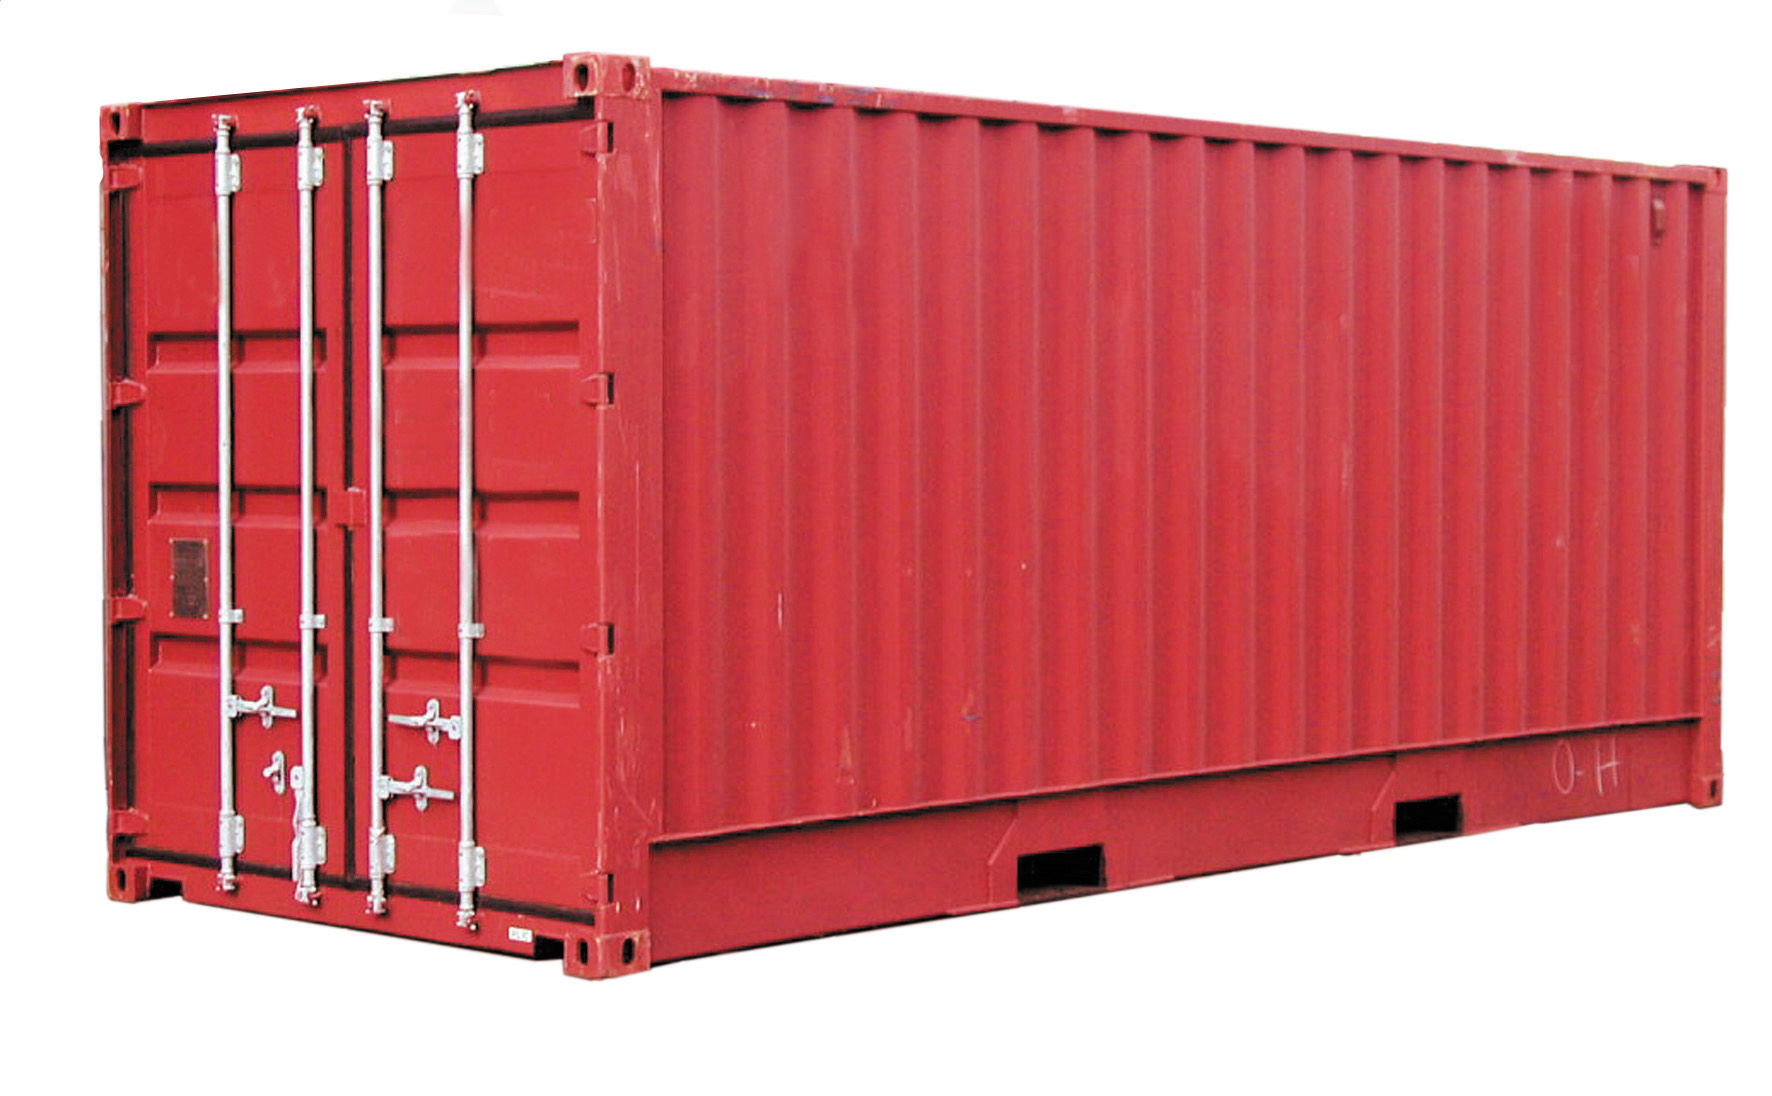 shipping container clipart - photo #1